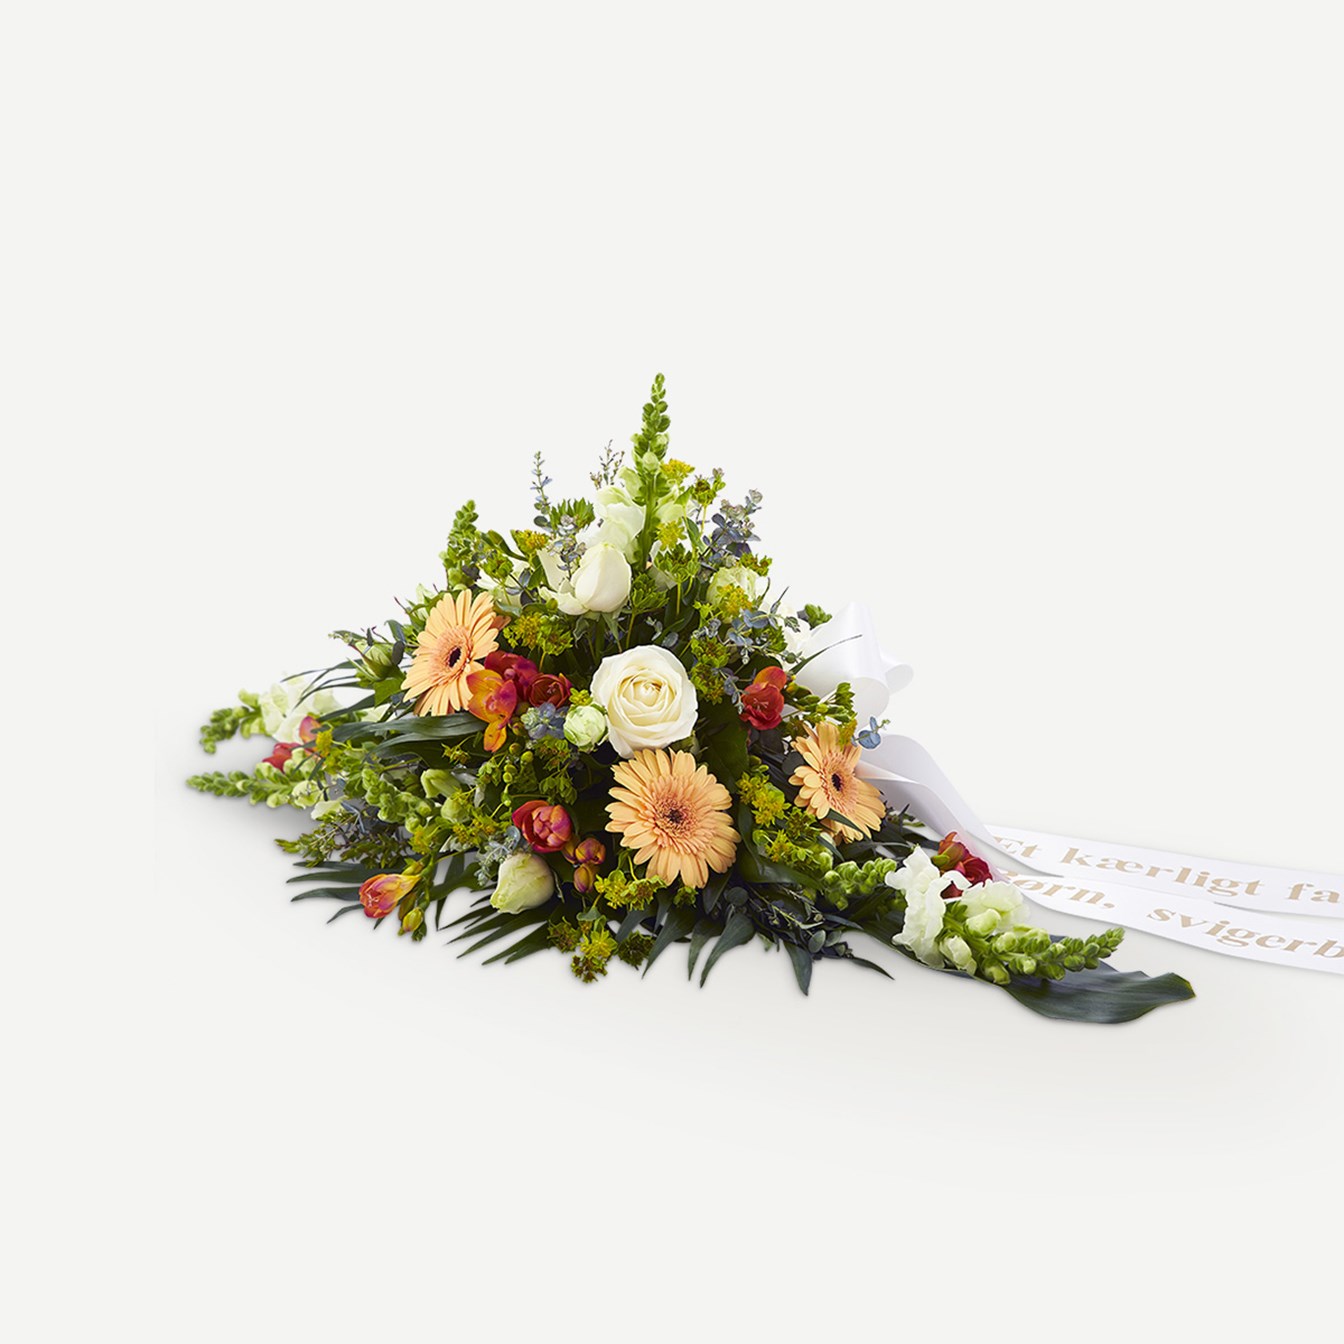 product image for Golden funeral decoration with ribbon